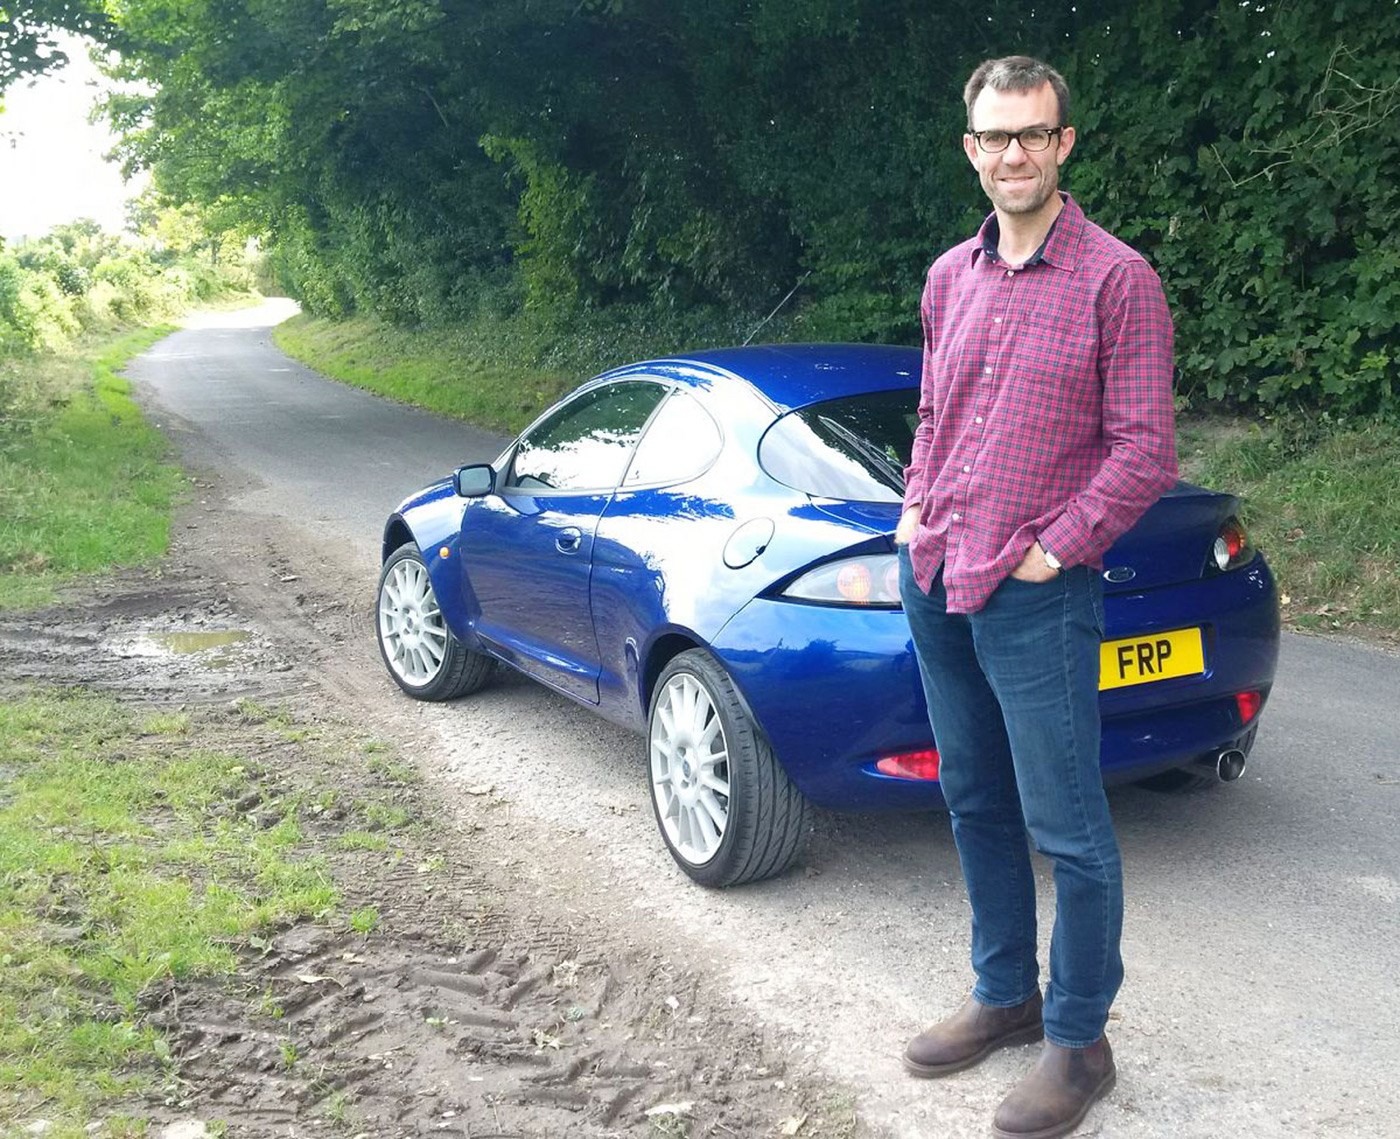 Author Tim Pollard with the Ford Racing Puma - it's the original press test car on the Ford UK heritage fleet